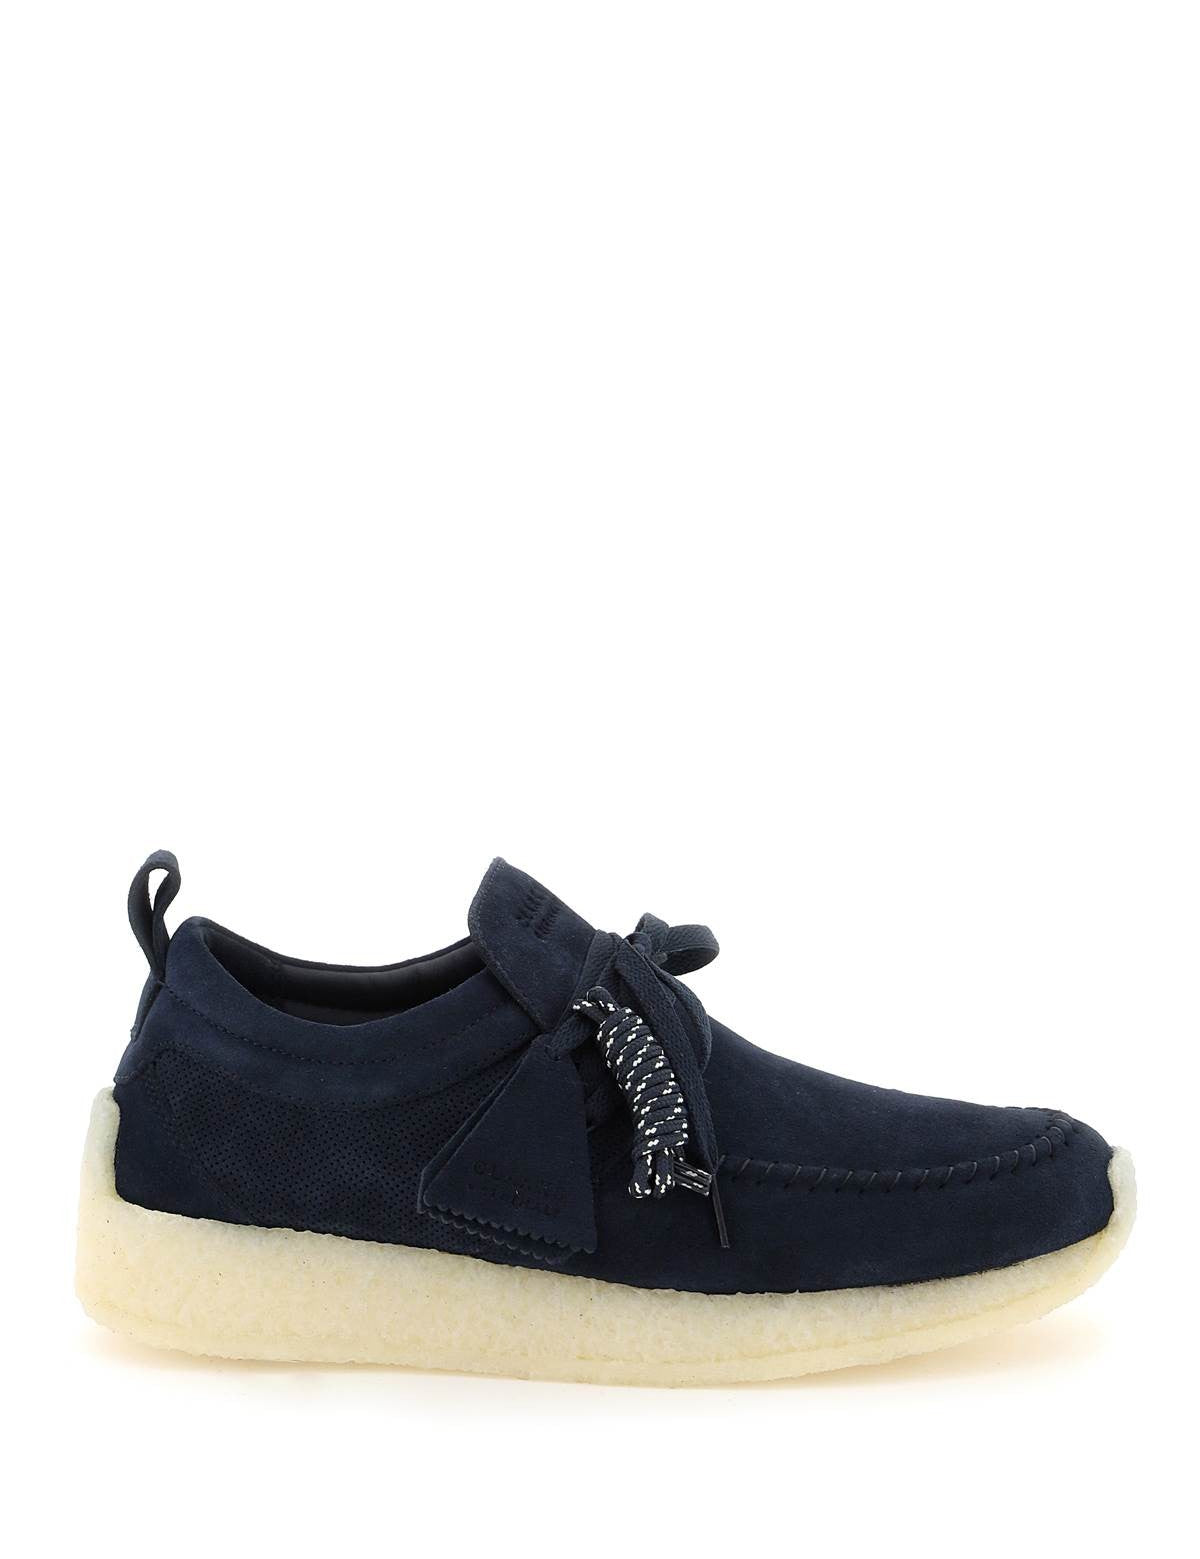 ronnie-fieg-x-clarks-maycliffe-lace-up-shoes.jpg